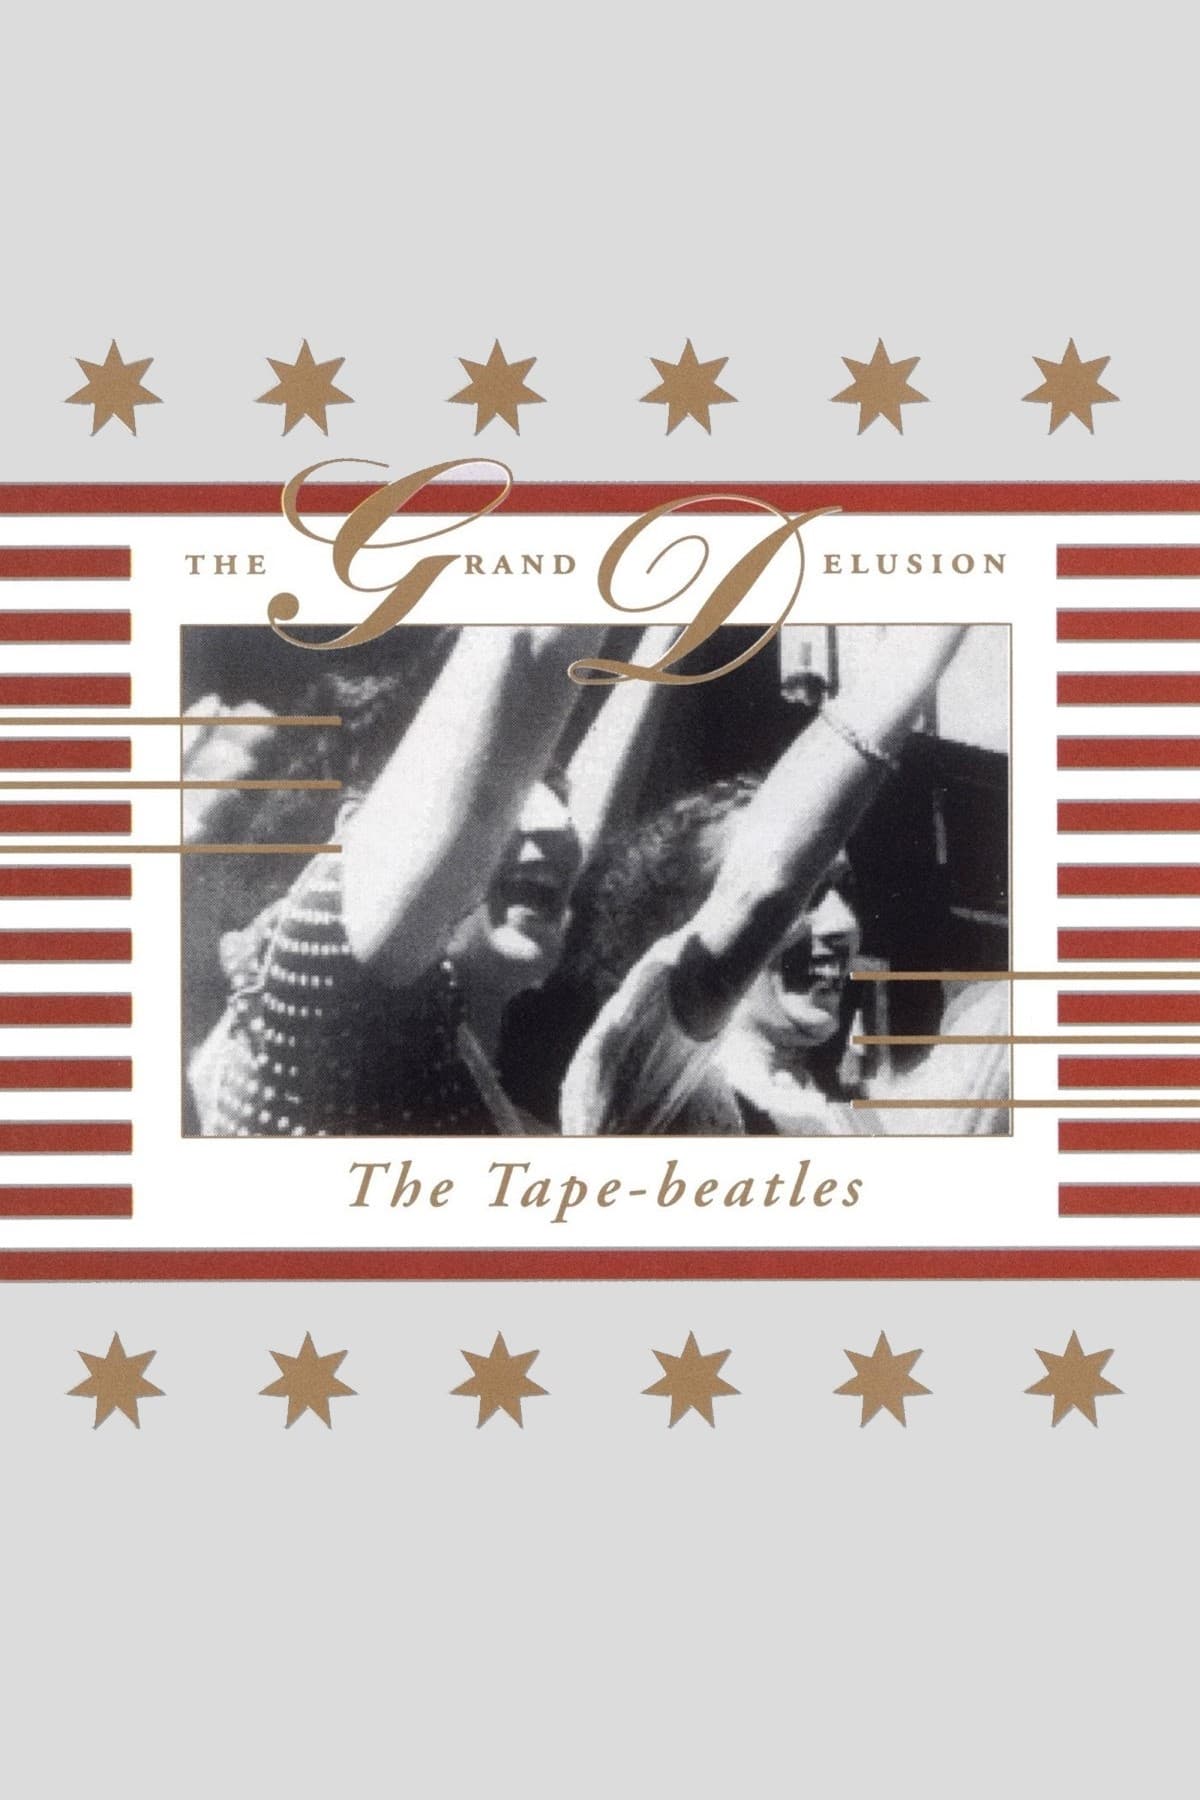 The Tape-Beatles: The Grand Delusion